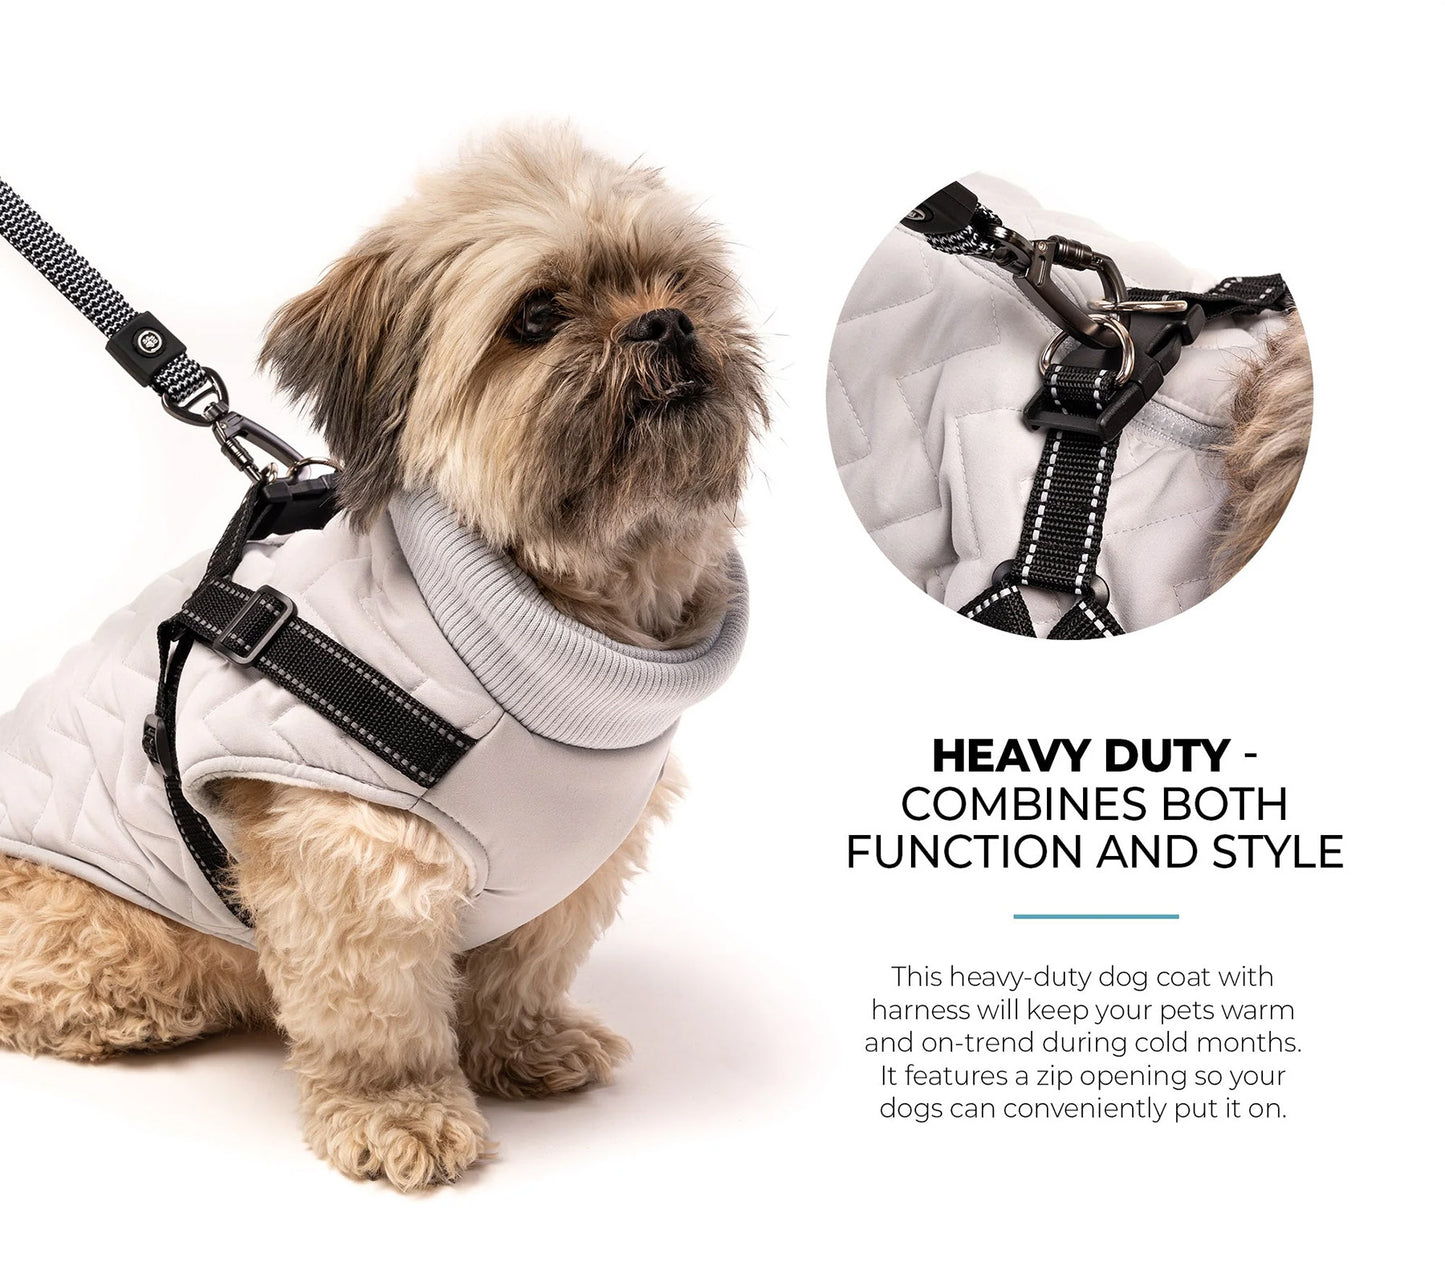 Quilted Dog Jacket With Built-In Harness - Grey